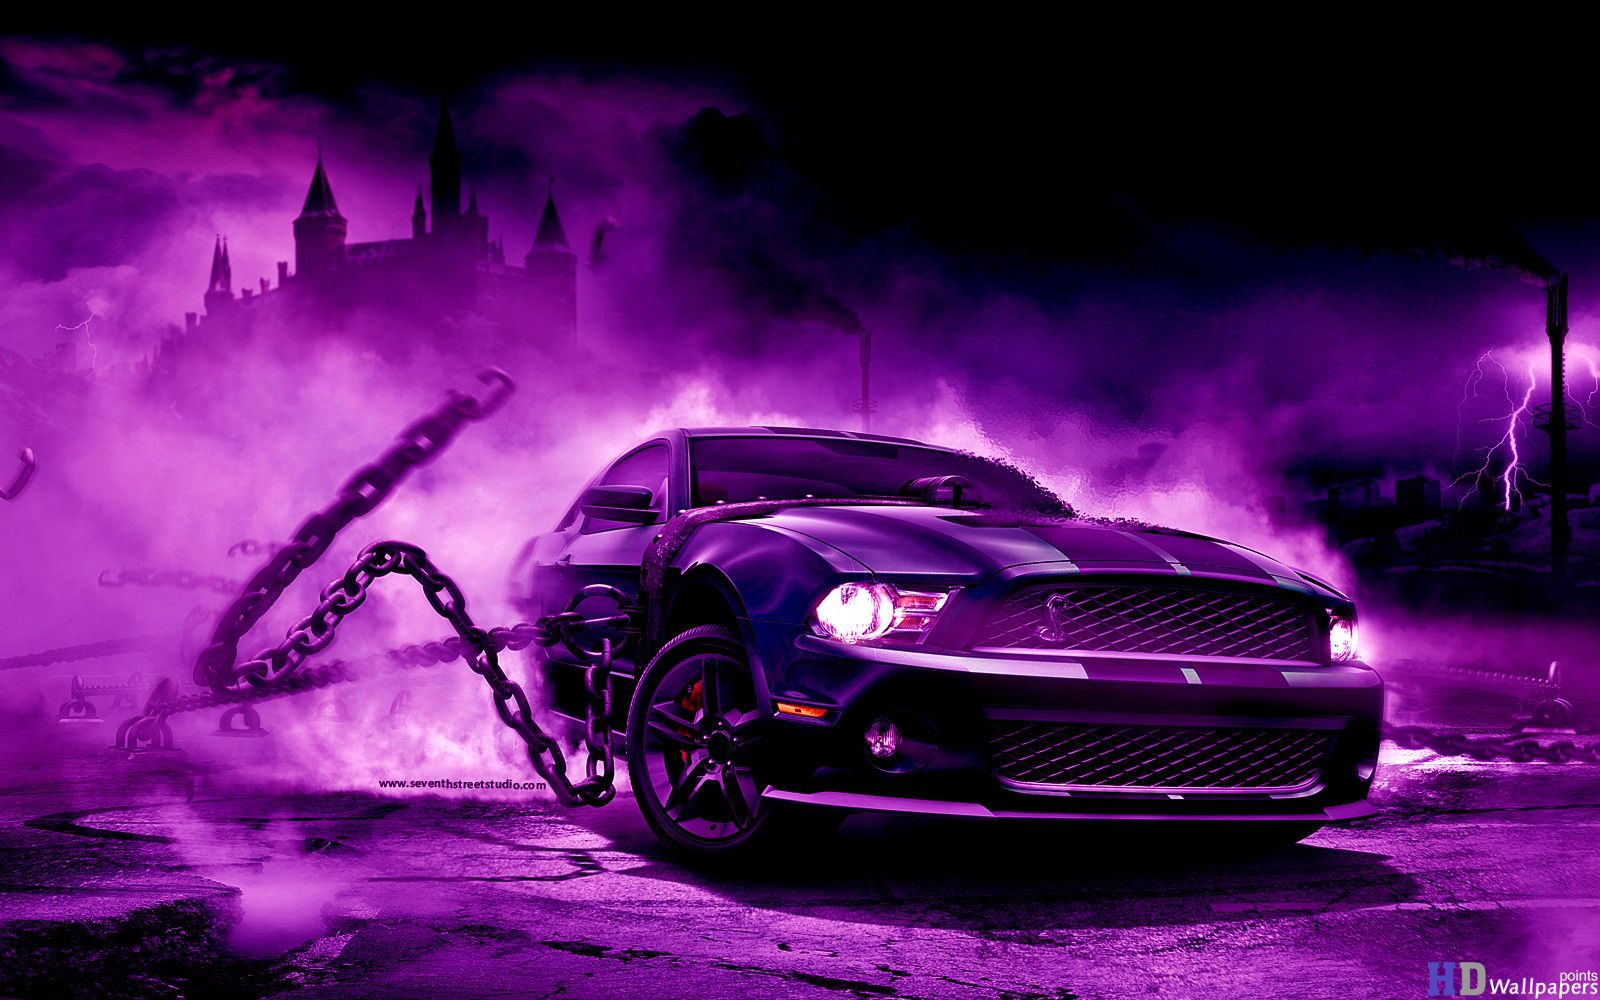 Cool car wallpaper with cool wallpapers cars cool car wallpapers hd cool car pictures